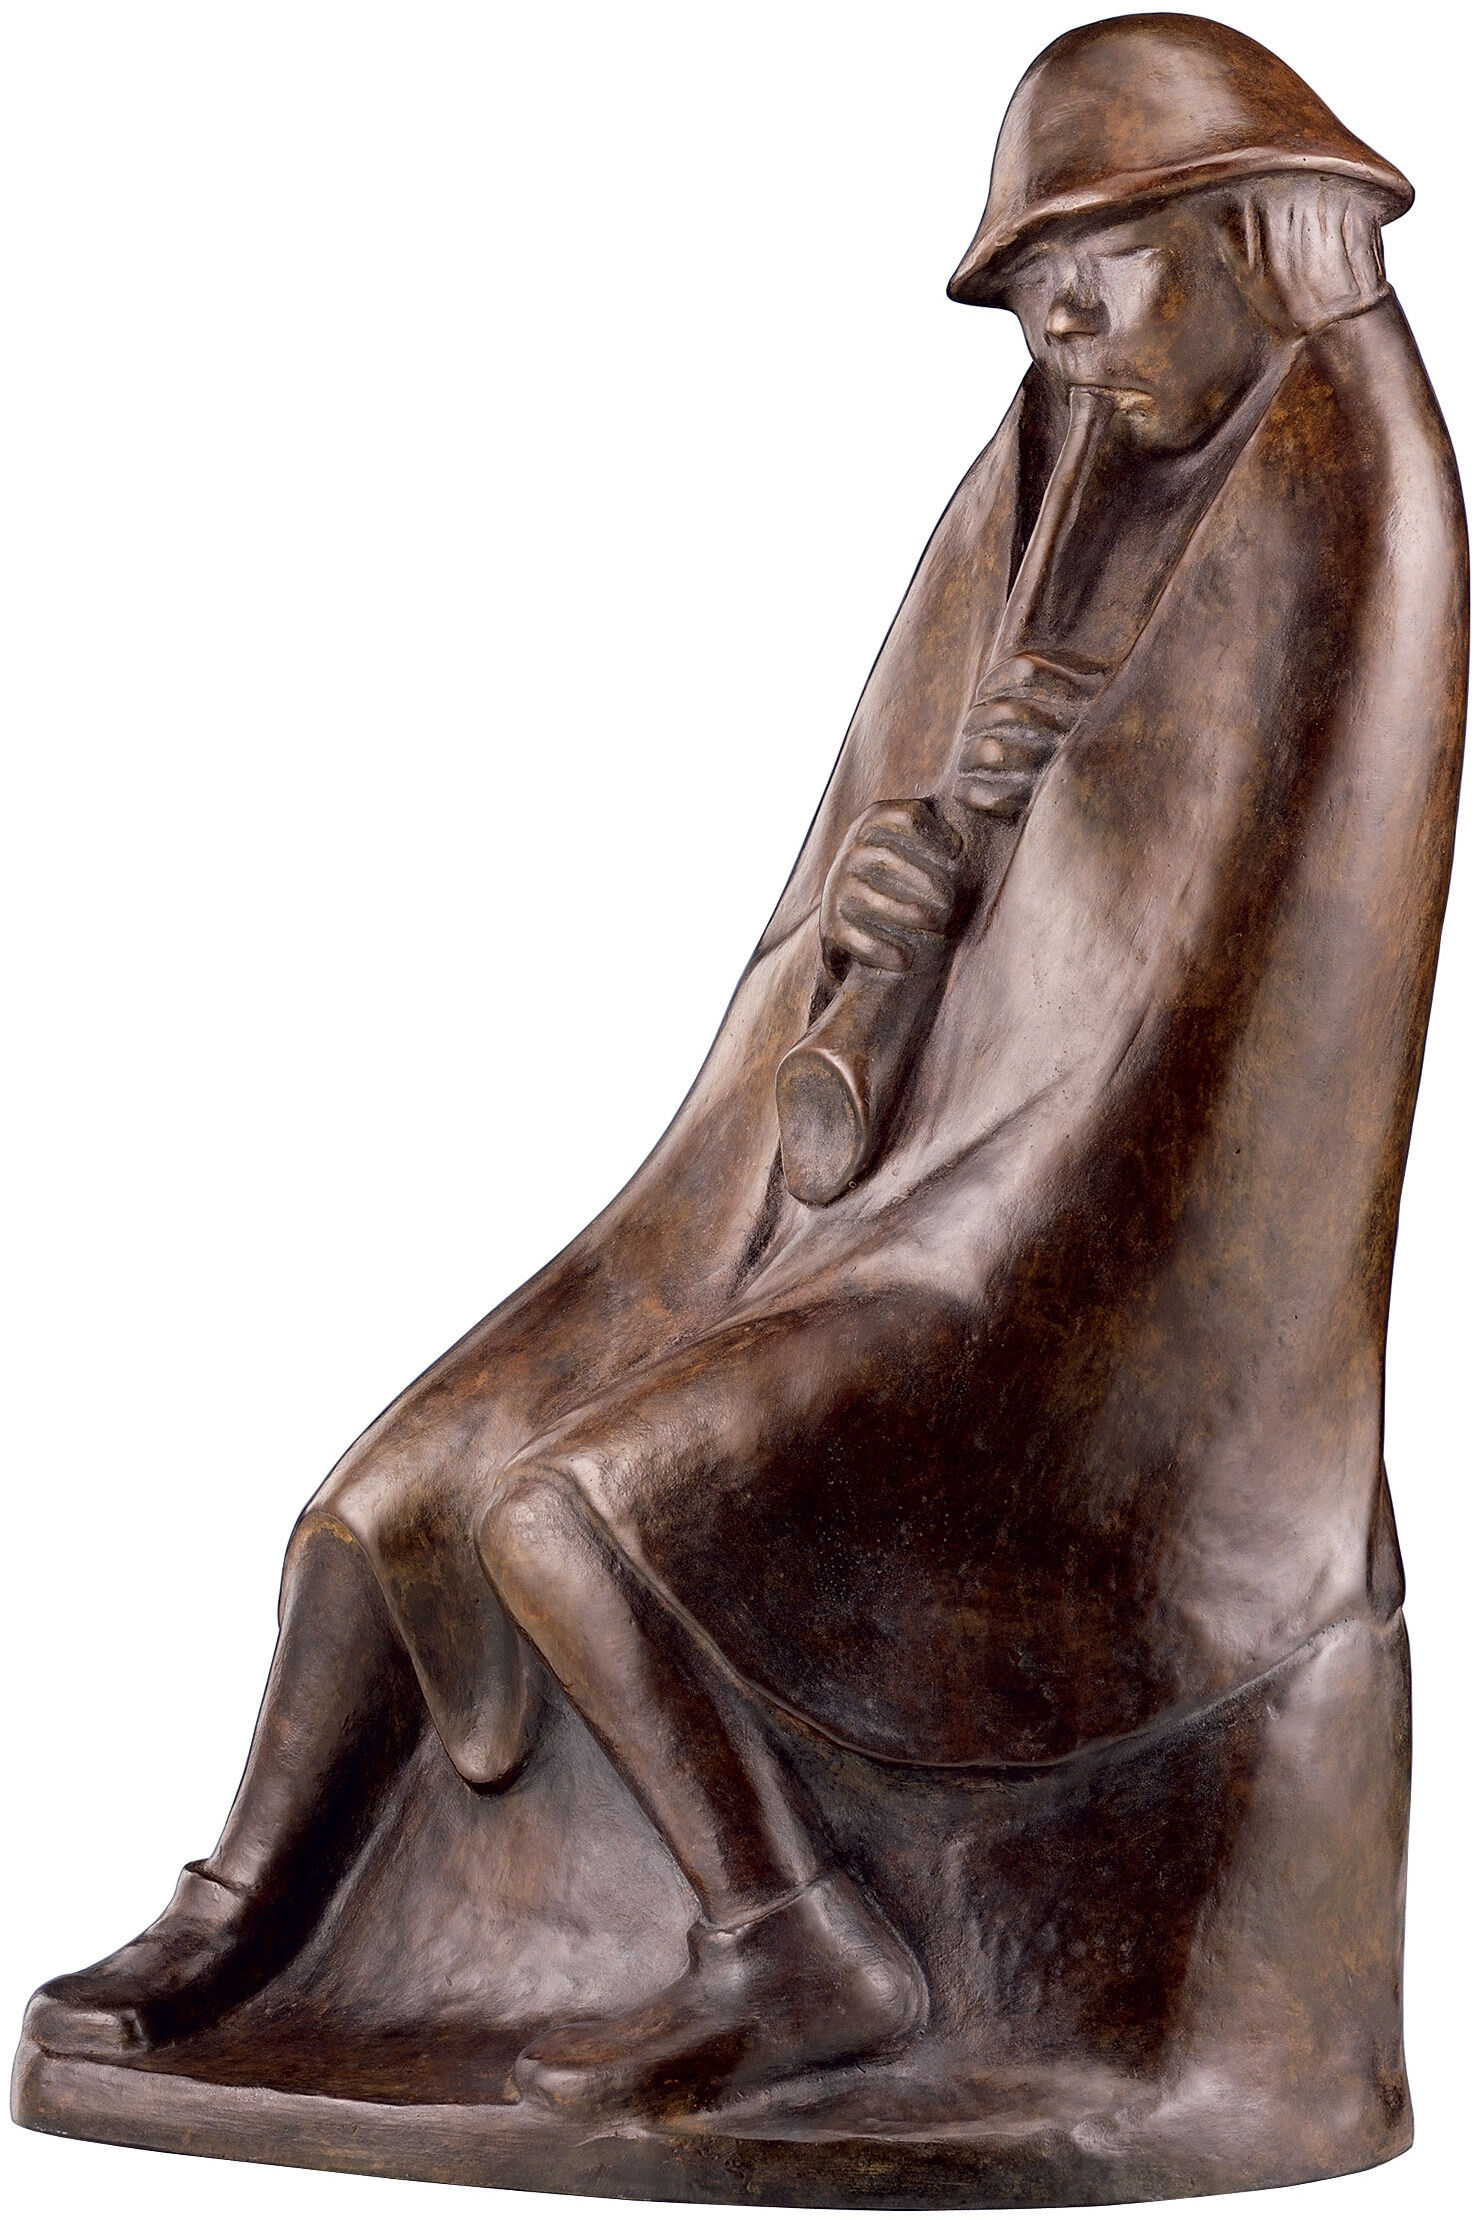 Sculpture "The Flute Player" (1936), bronze reduction by Ernst Barlach